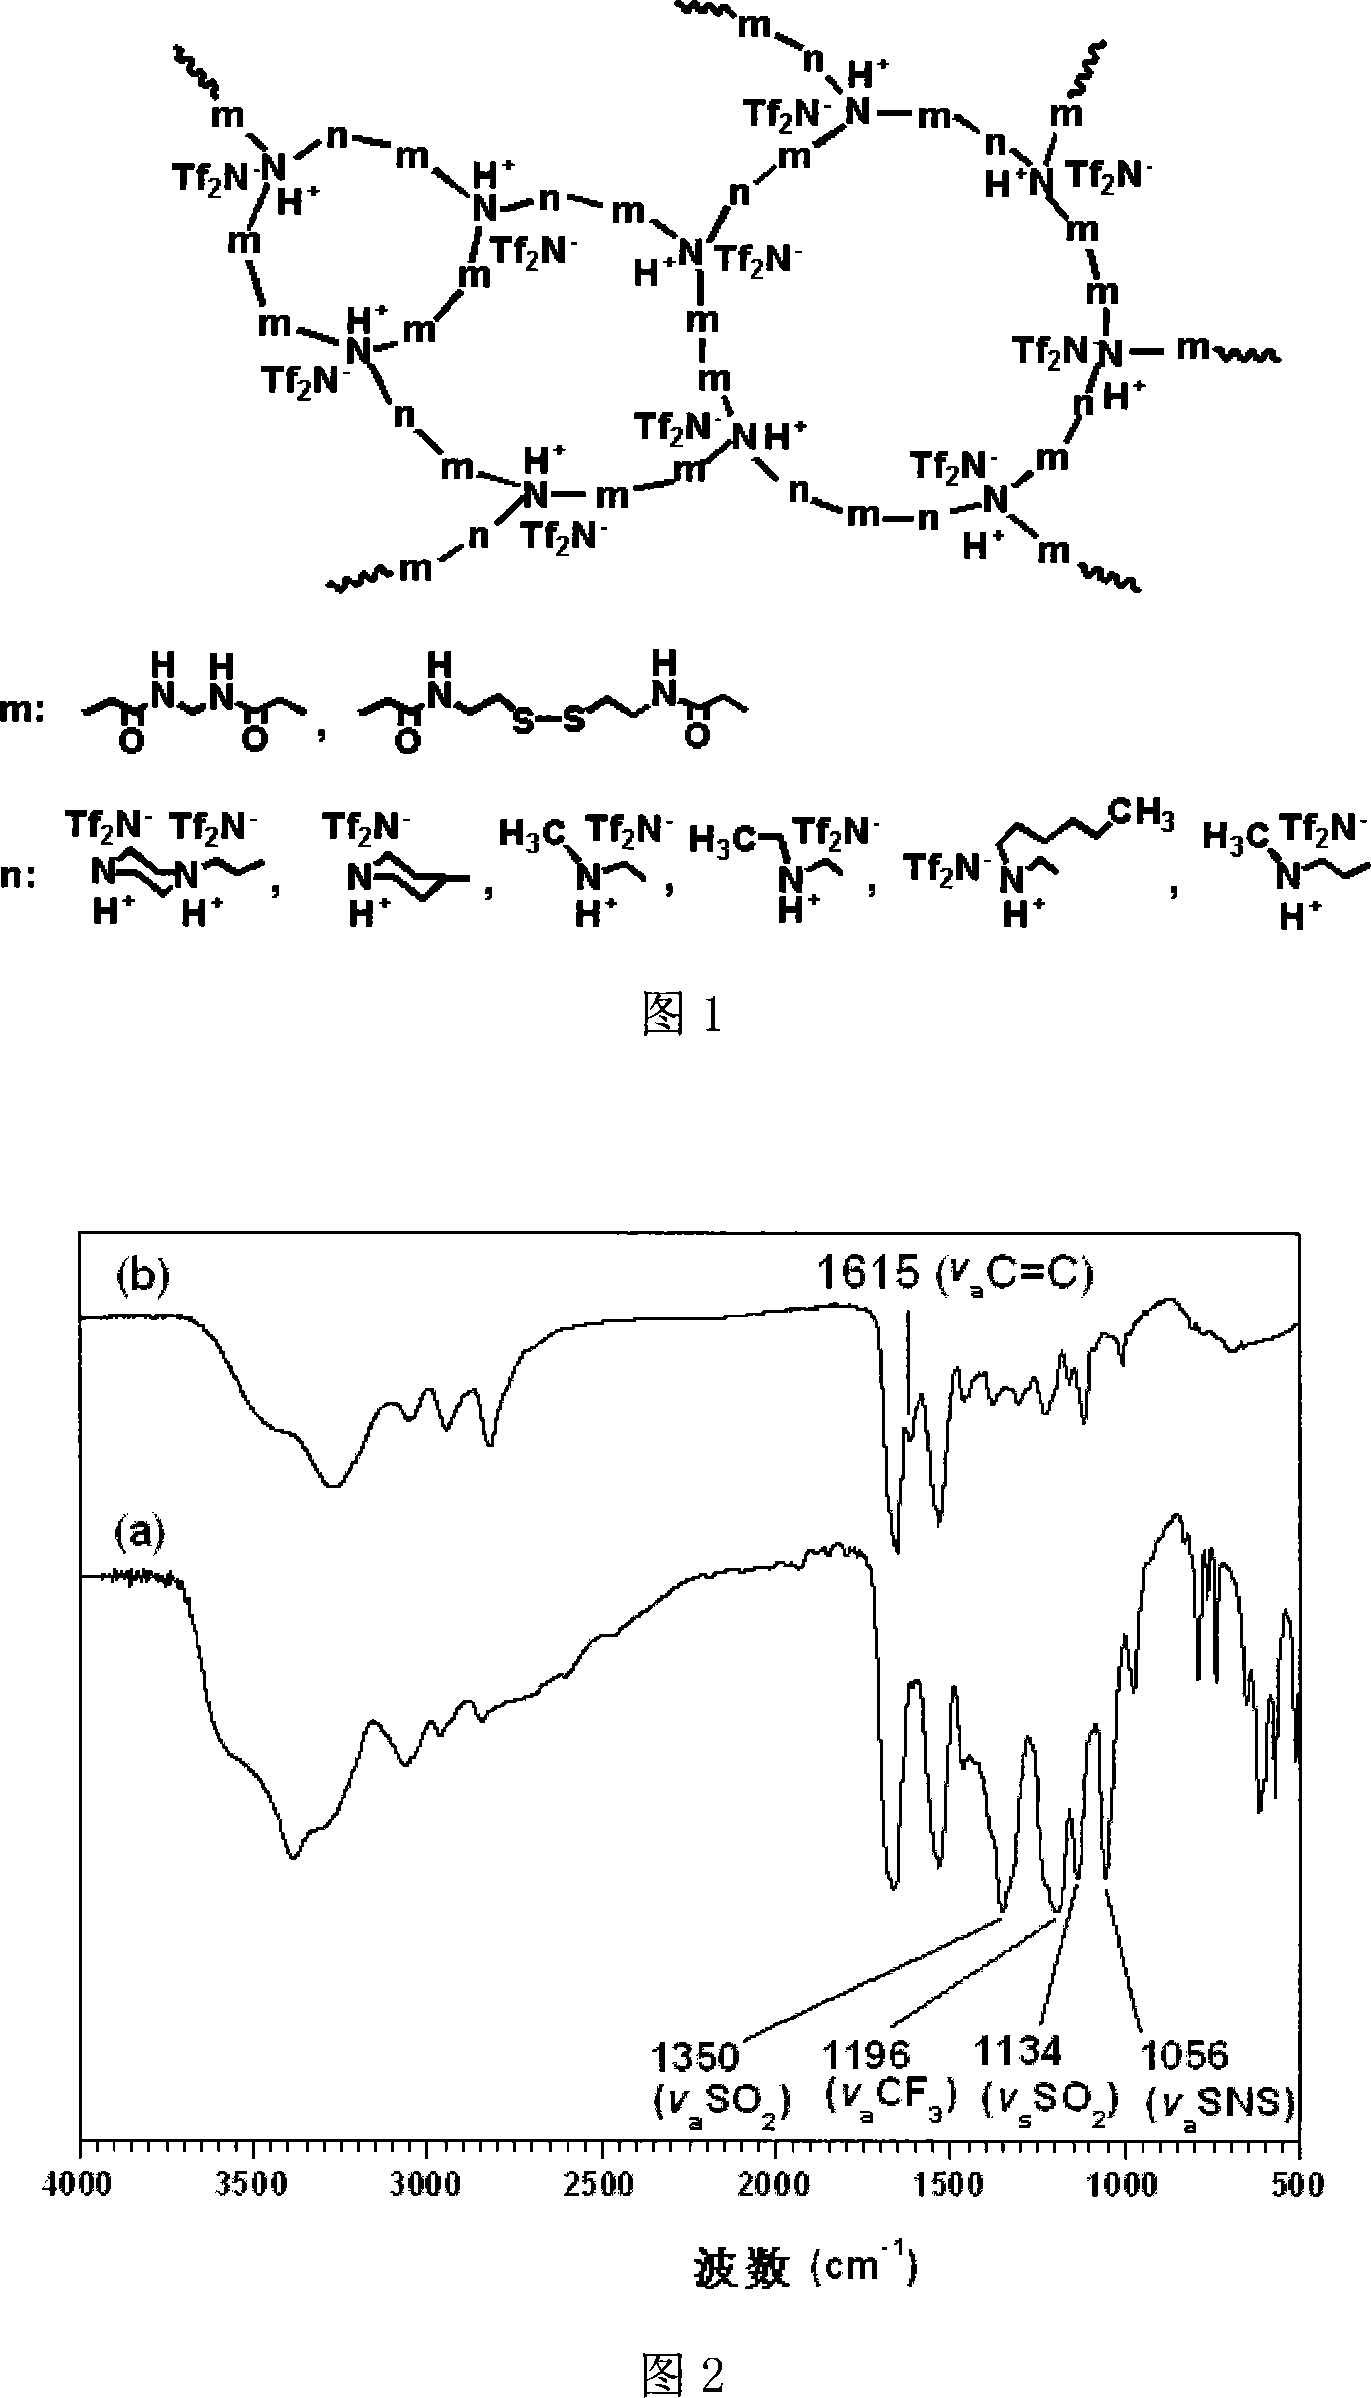 Crosslinked polyalcohol membrana body material, method for producing the same and process of using